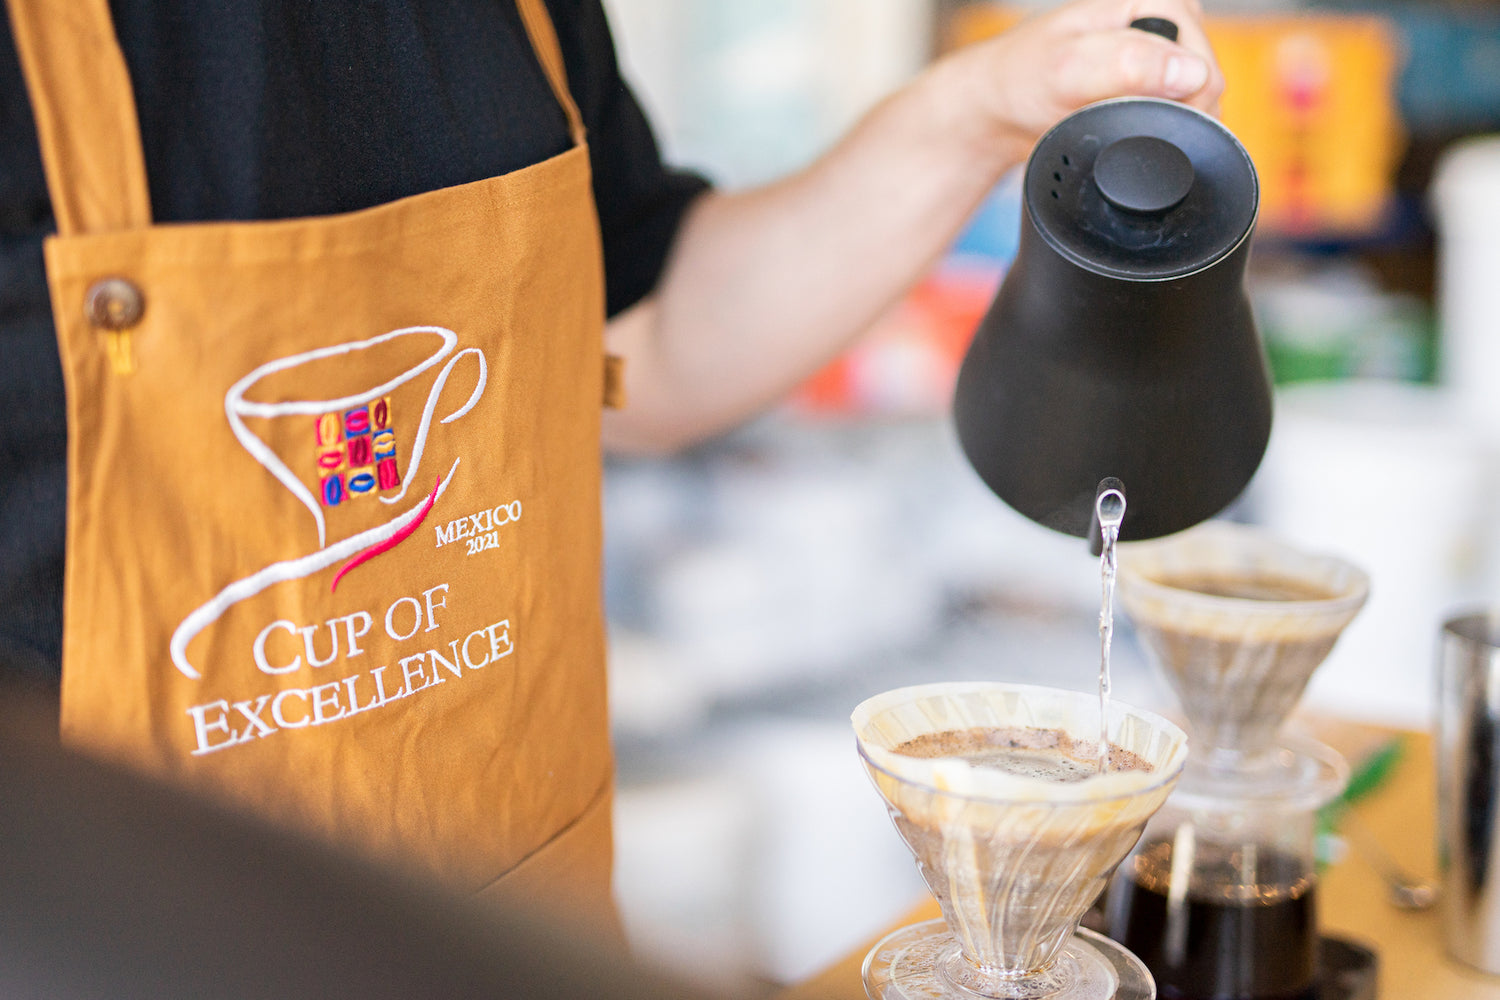 Kaffee Tasting von Cup of Excellence 2021 